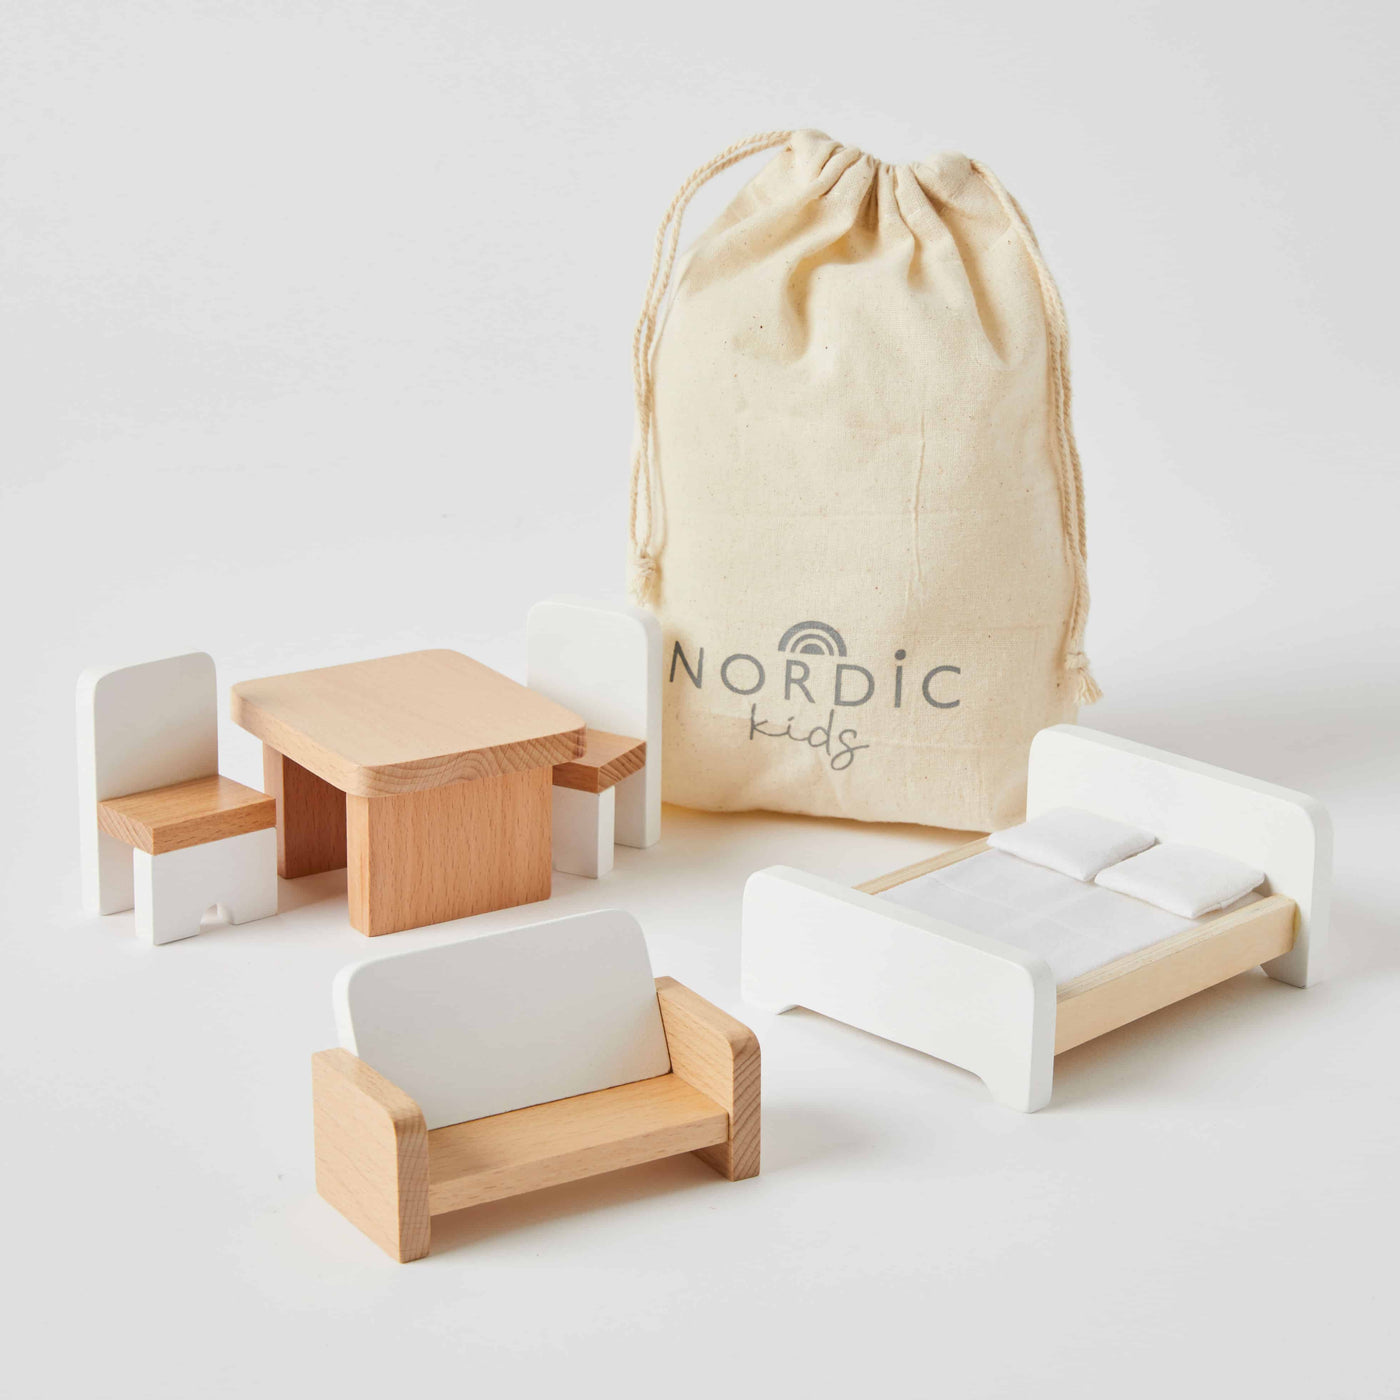 WOODEN DOLL HOUSE FURNITURE-Nordic Kids-Lima & Co